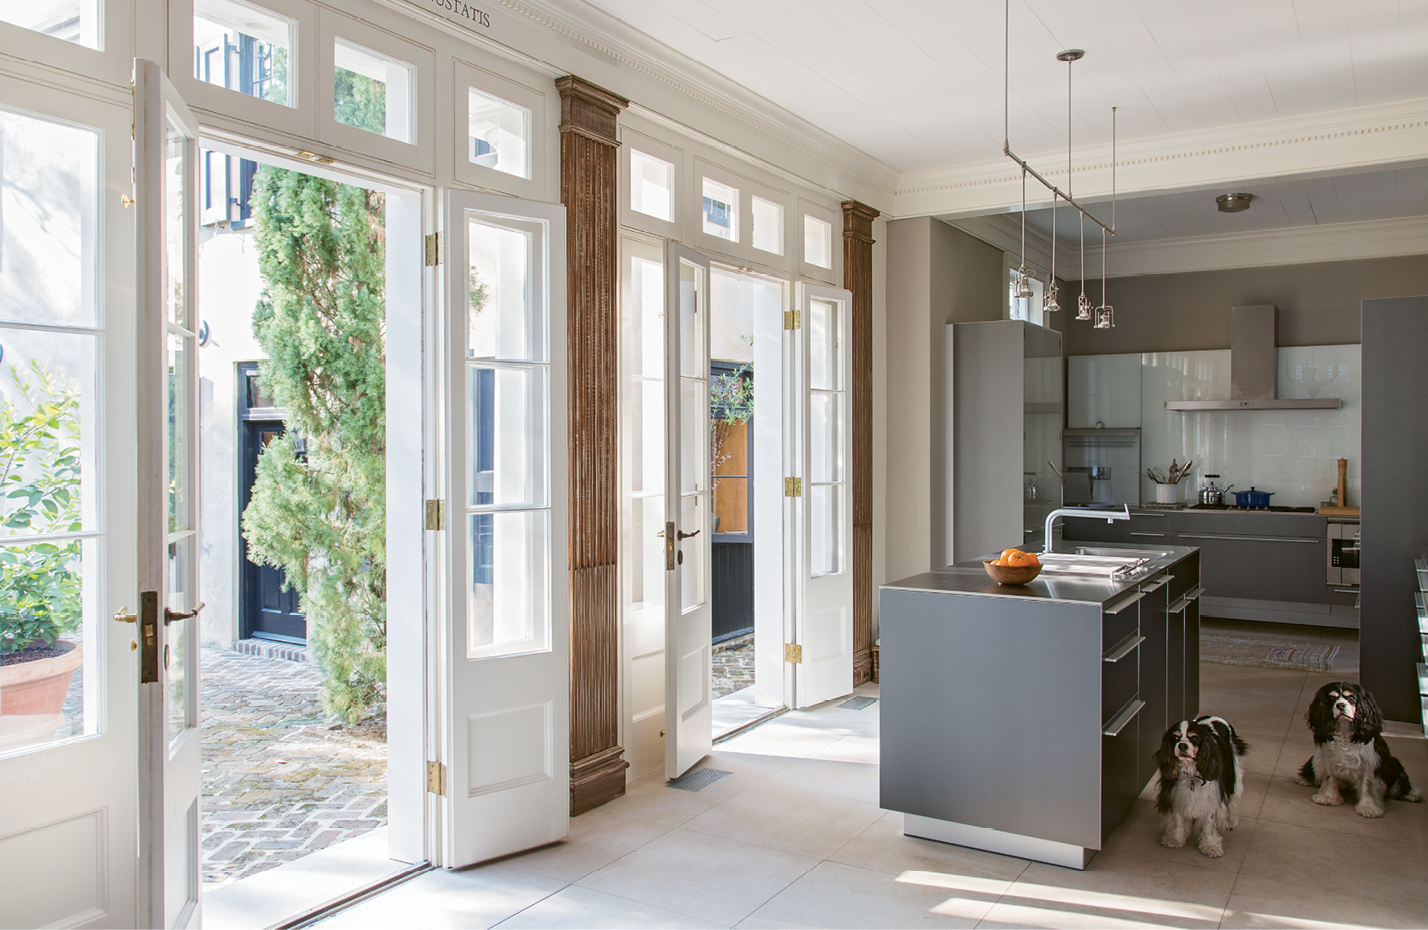 Sleek cabinetry by Bulthaup commingles with antiqued pilasters in the kitchen, located within what was once the rear porch.